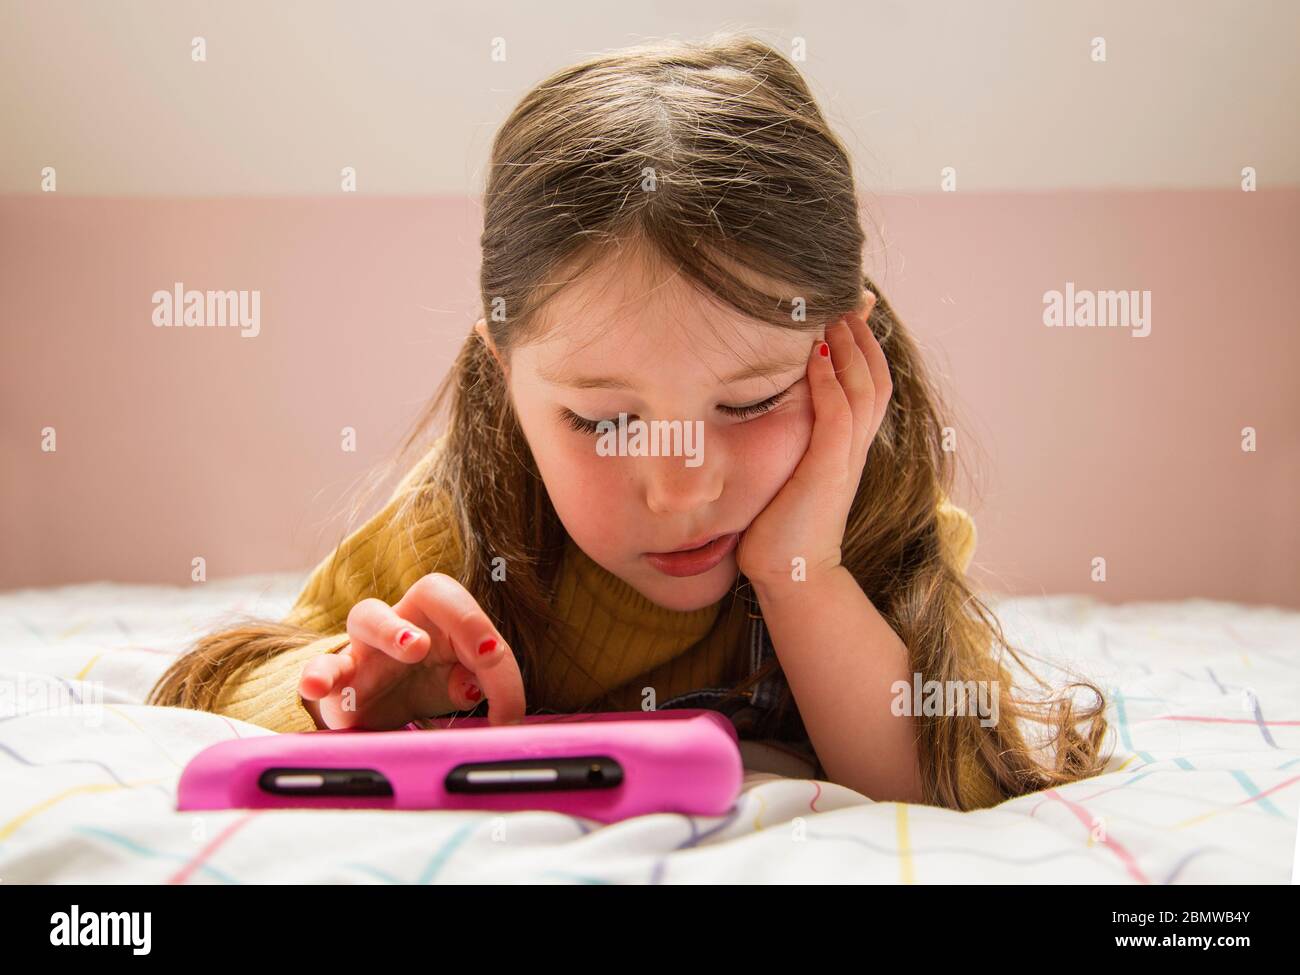 Young girl playing on a tablet looking bored Stock Photo